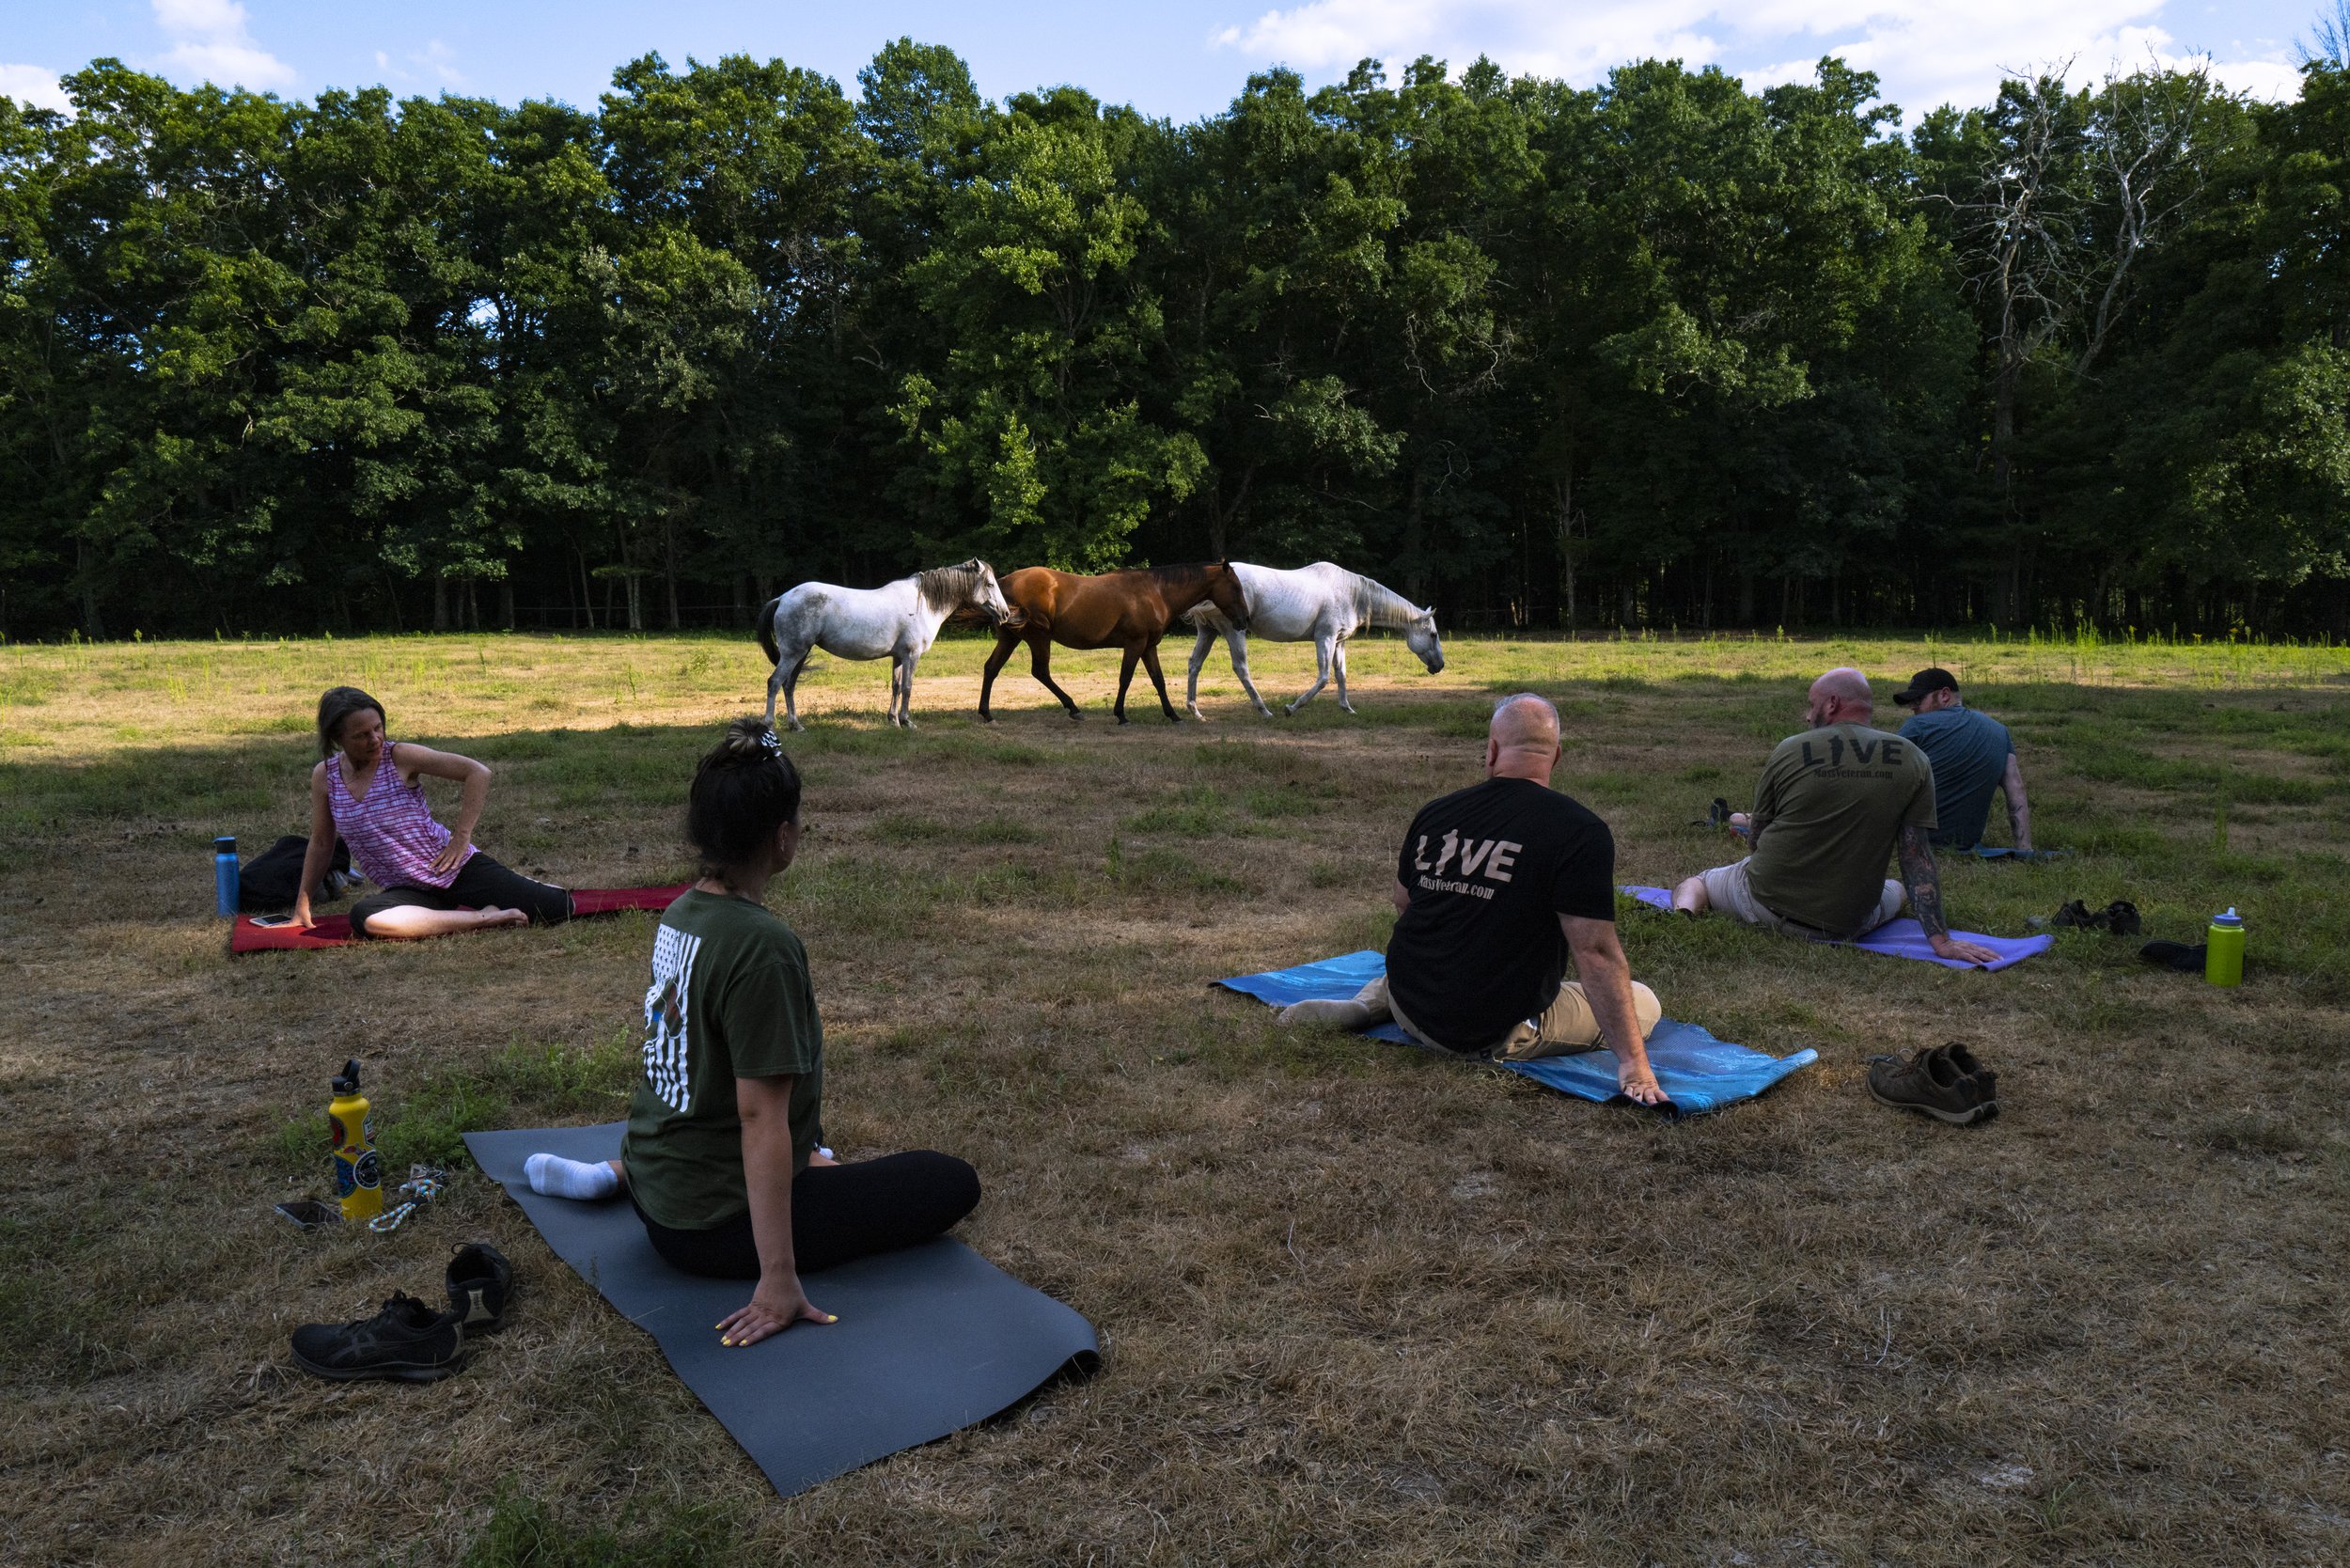  Veterans take part in a yoga class taught by Judy Thapa before they begin working with their horses at Project ComeBack in Holliston, Mass. on August 3, 2022. The classes guide the veterans through meditation and different poses to help with self-he